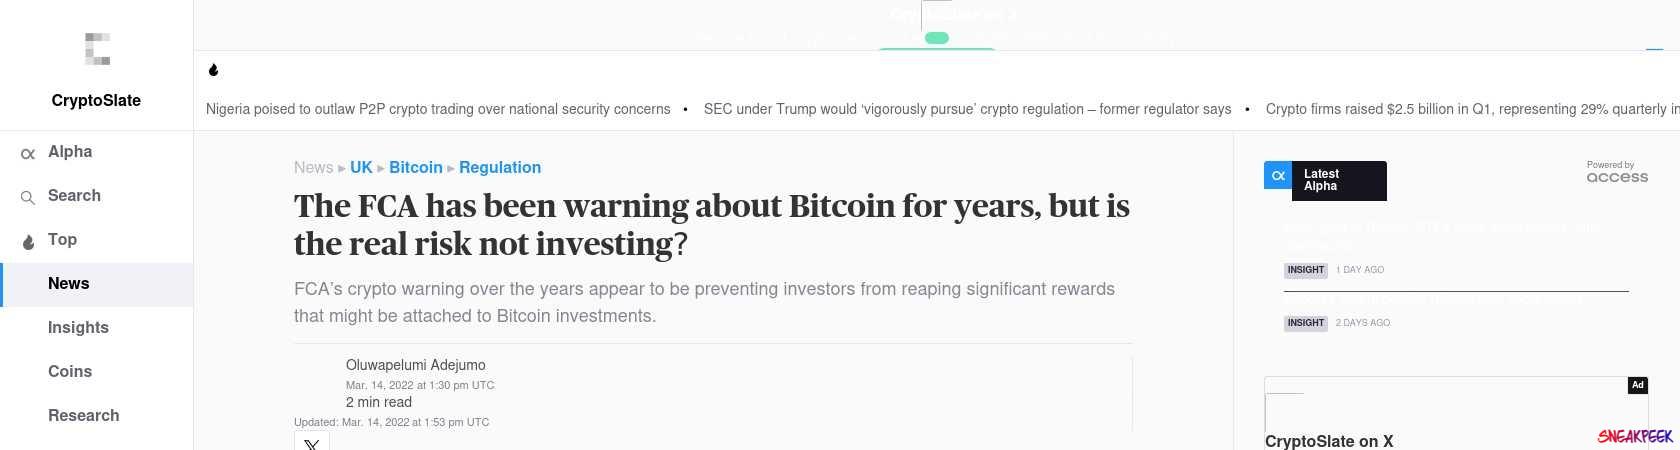 Read the full Article:  ⭲ The FCA has been warning about Bitcoin for years, but is the real risk not investing?